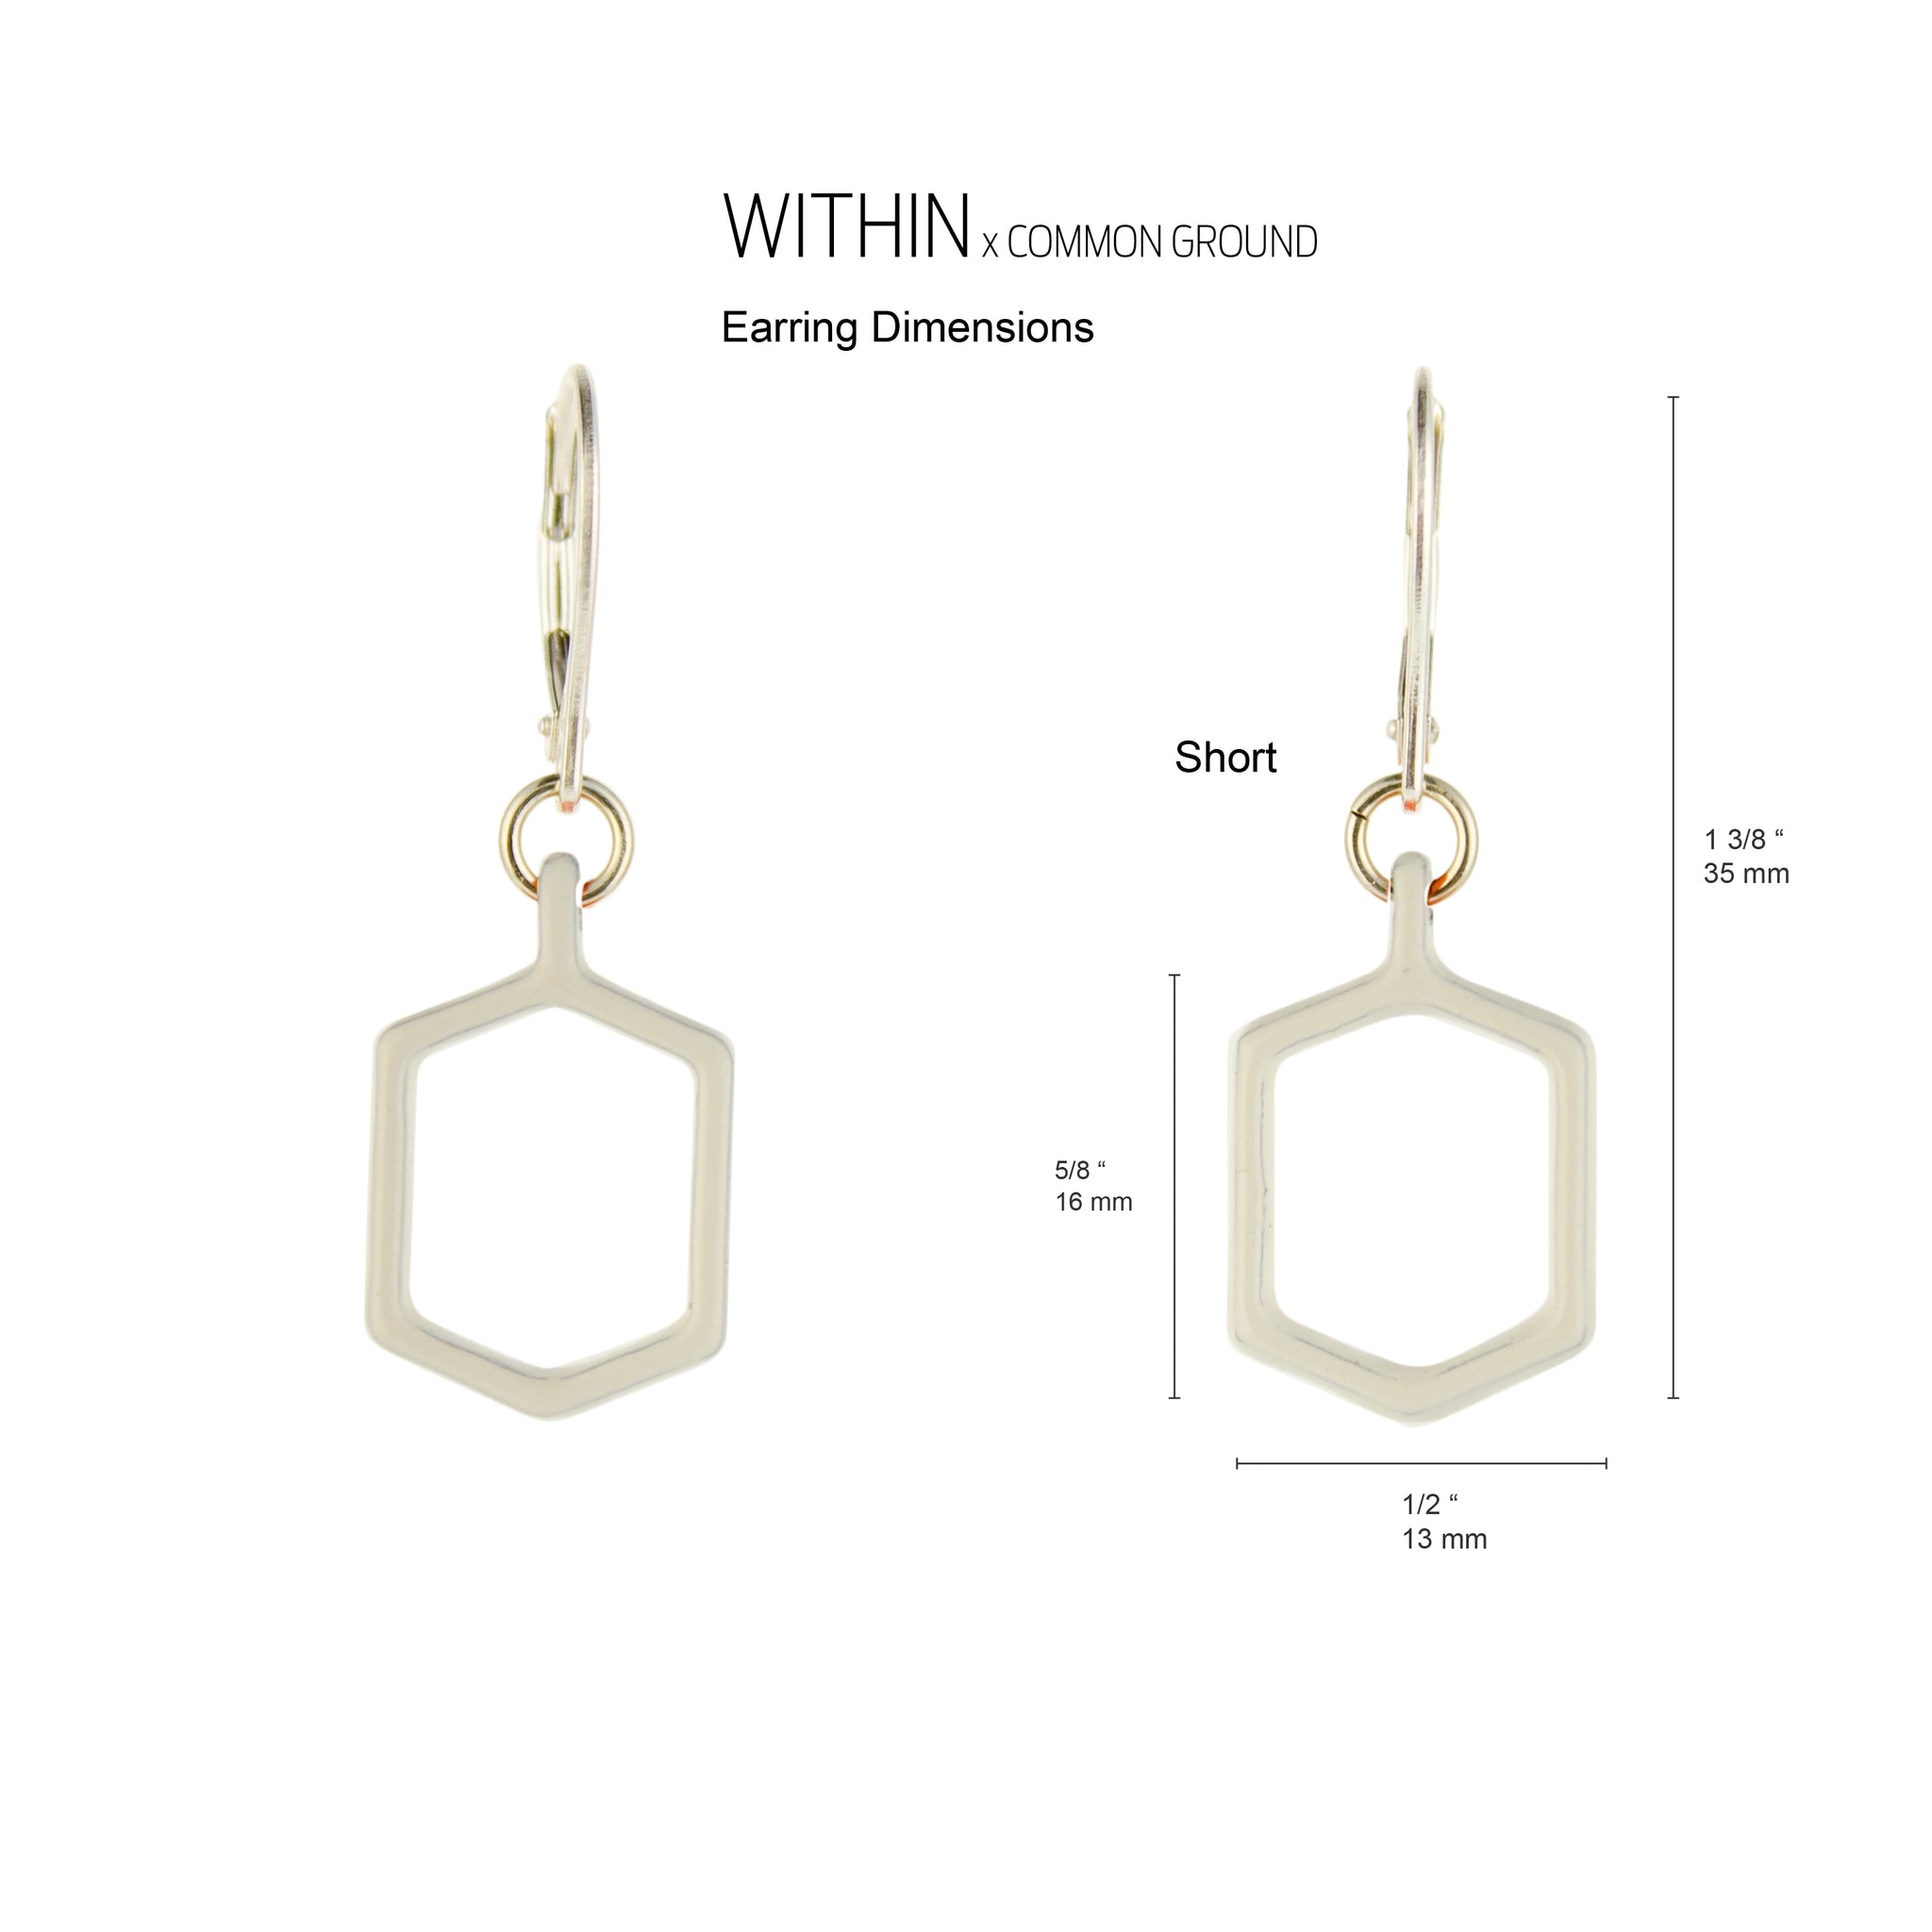 Bright_White - WITHIN x COMMON GROUND Earring Dim View